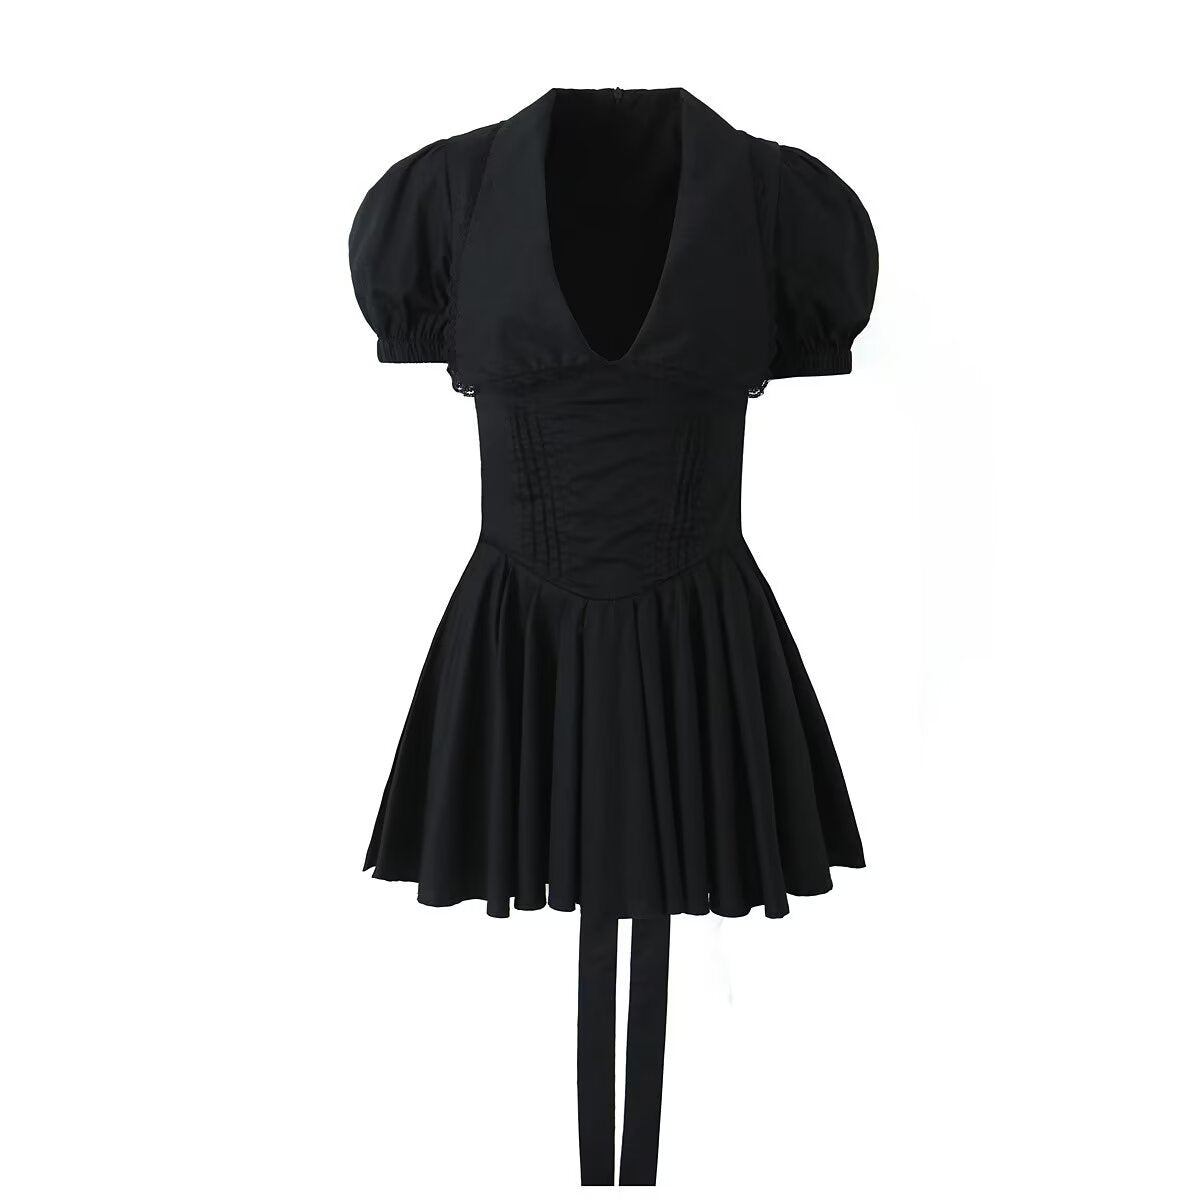 Spring Two Color Lace up Peter Pan Collar Lace Stitching Dress